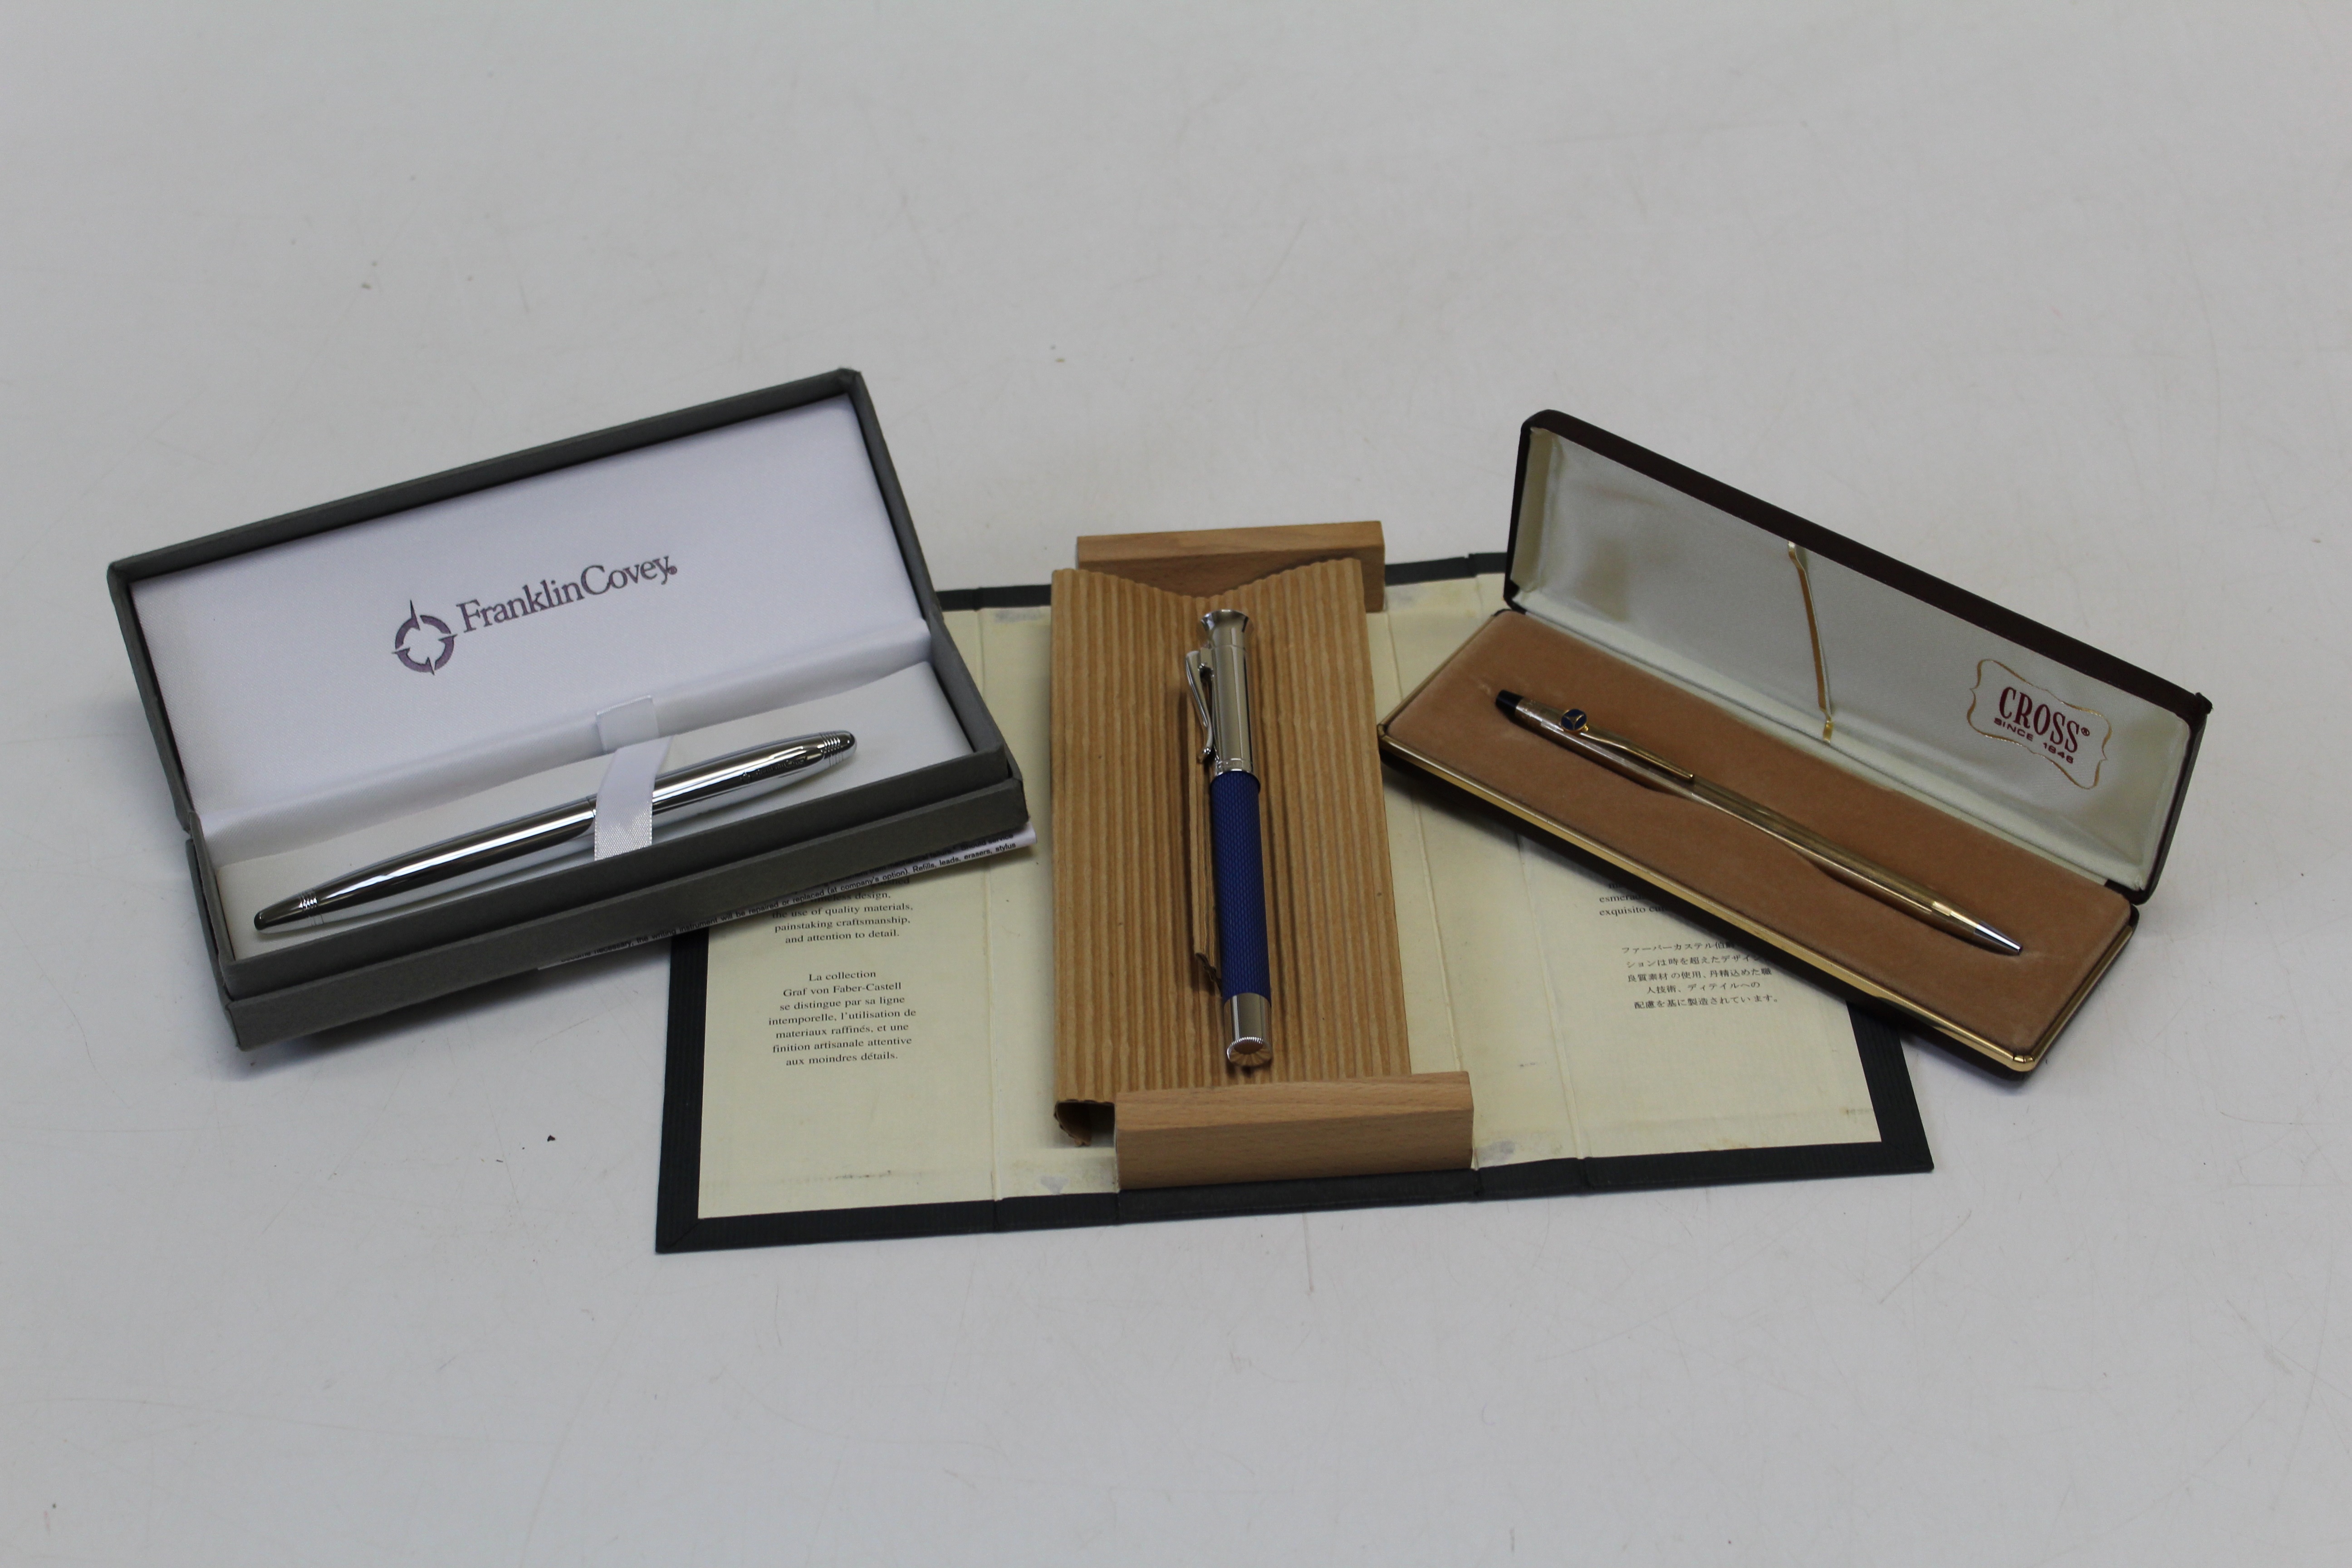 A Graf von Faber- Castell 18k nibbed fountain pen with white metal lid. Along with a cross ball